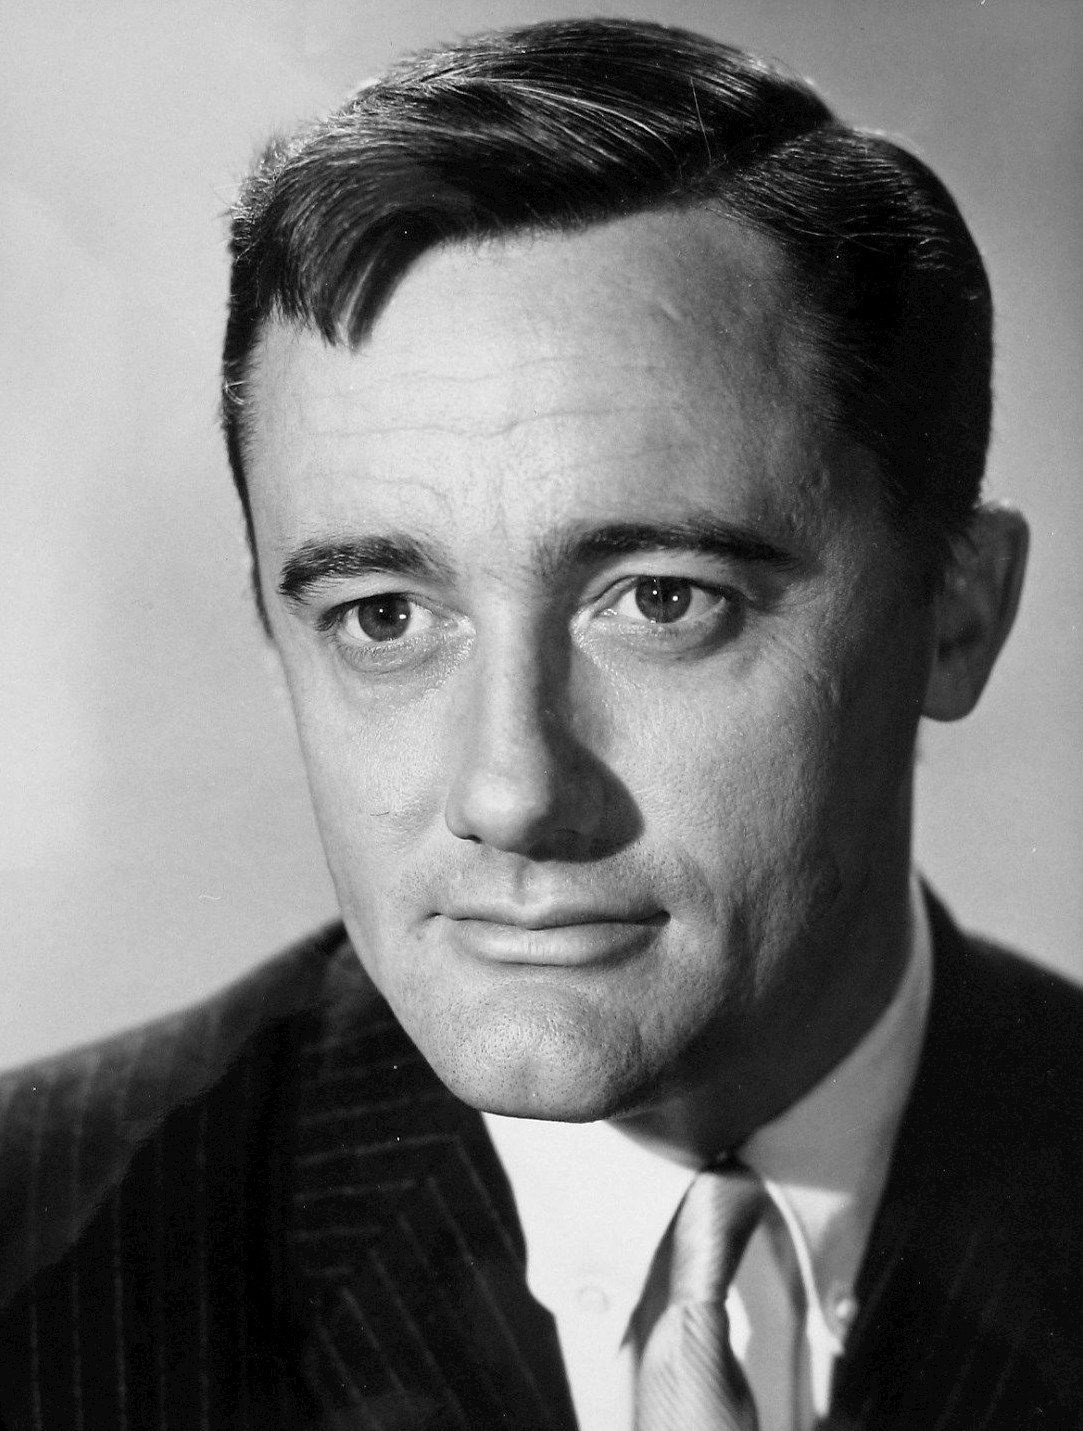 Photo of Robert Vaughn from the television program The Man From U.N.C.L.E. | Photo: NBC Television, Public domain, via Wikimedia Commons